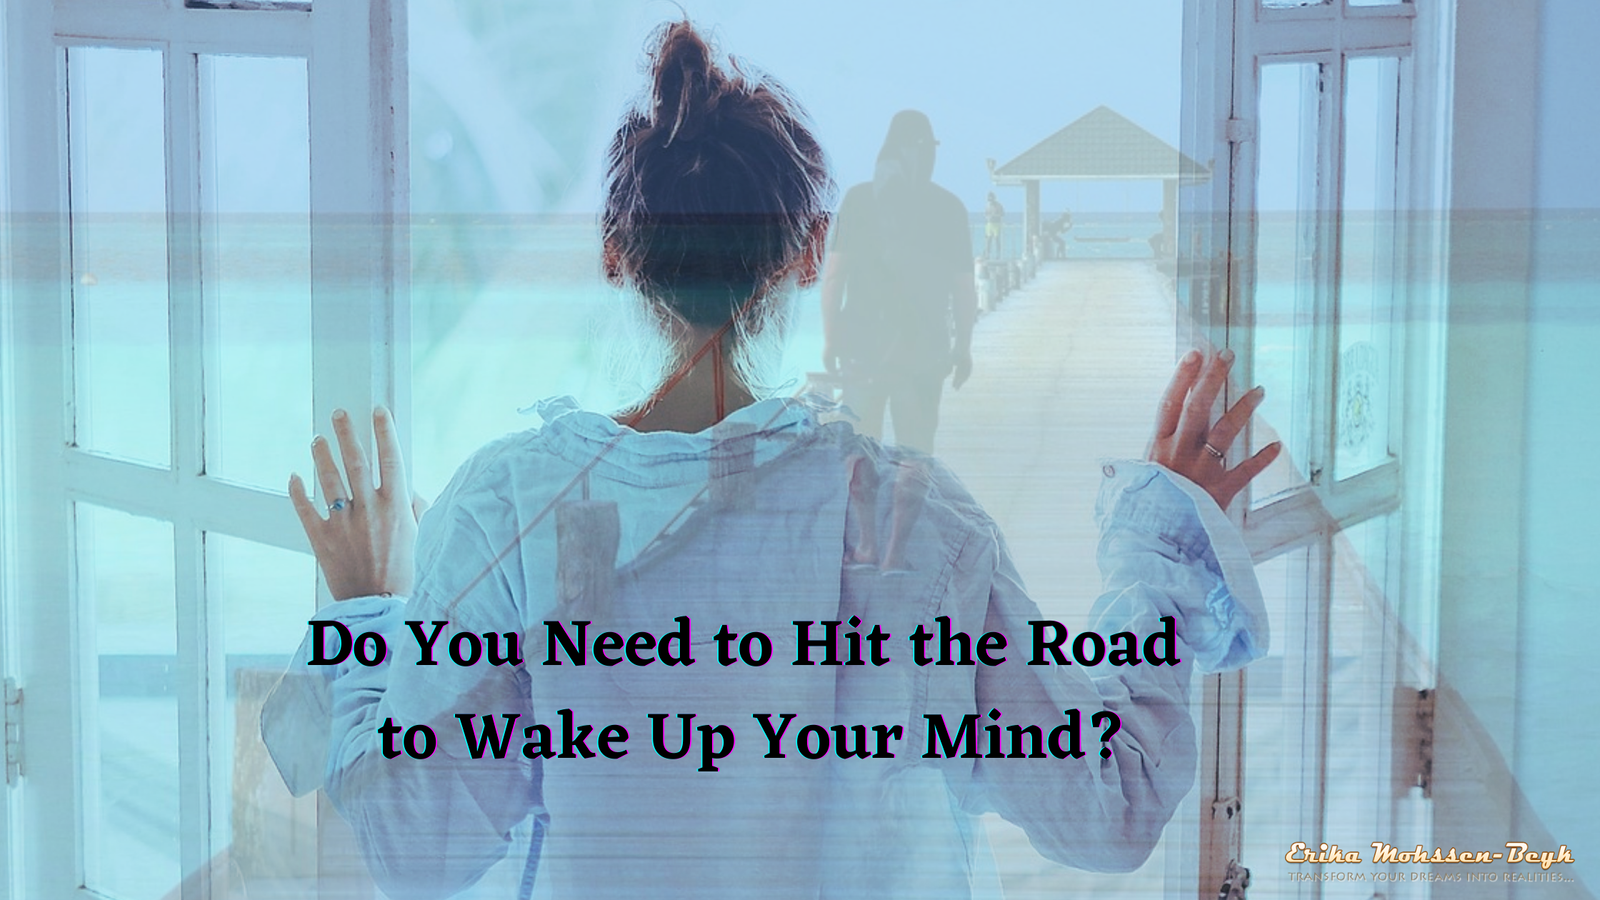 Do You Need to Hit the Road to Wake Up Your Mind?